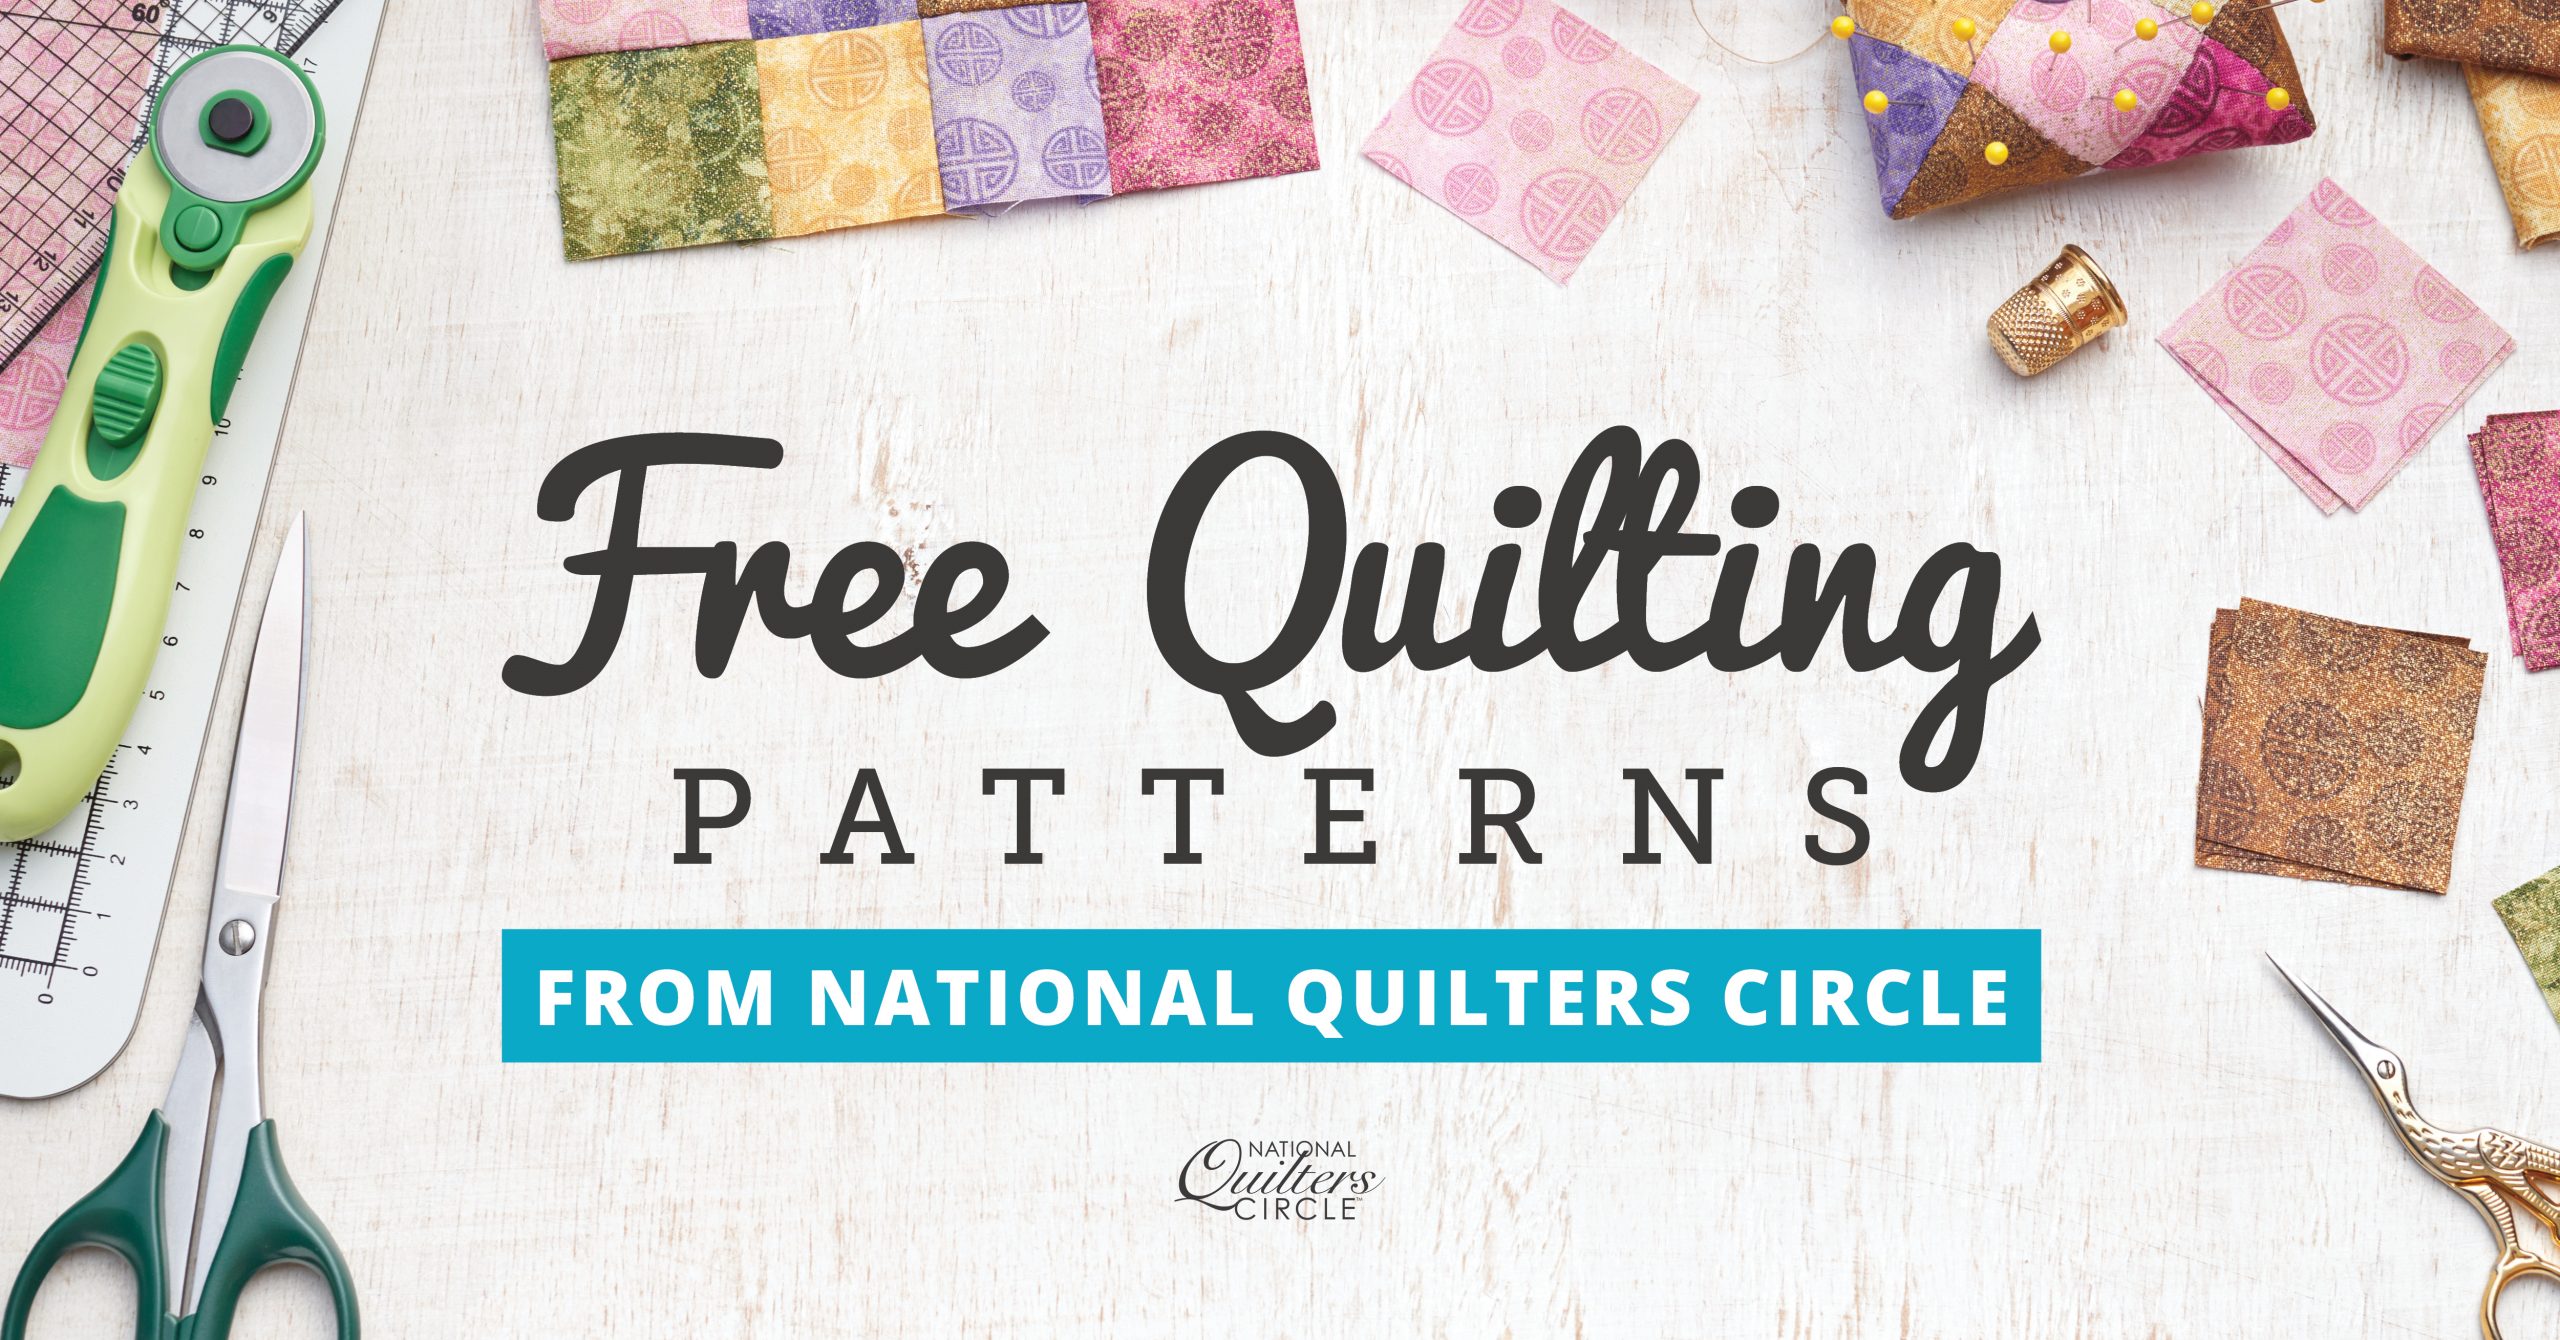 All About Cutting Mats  National Sewing Circle